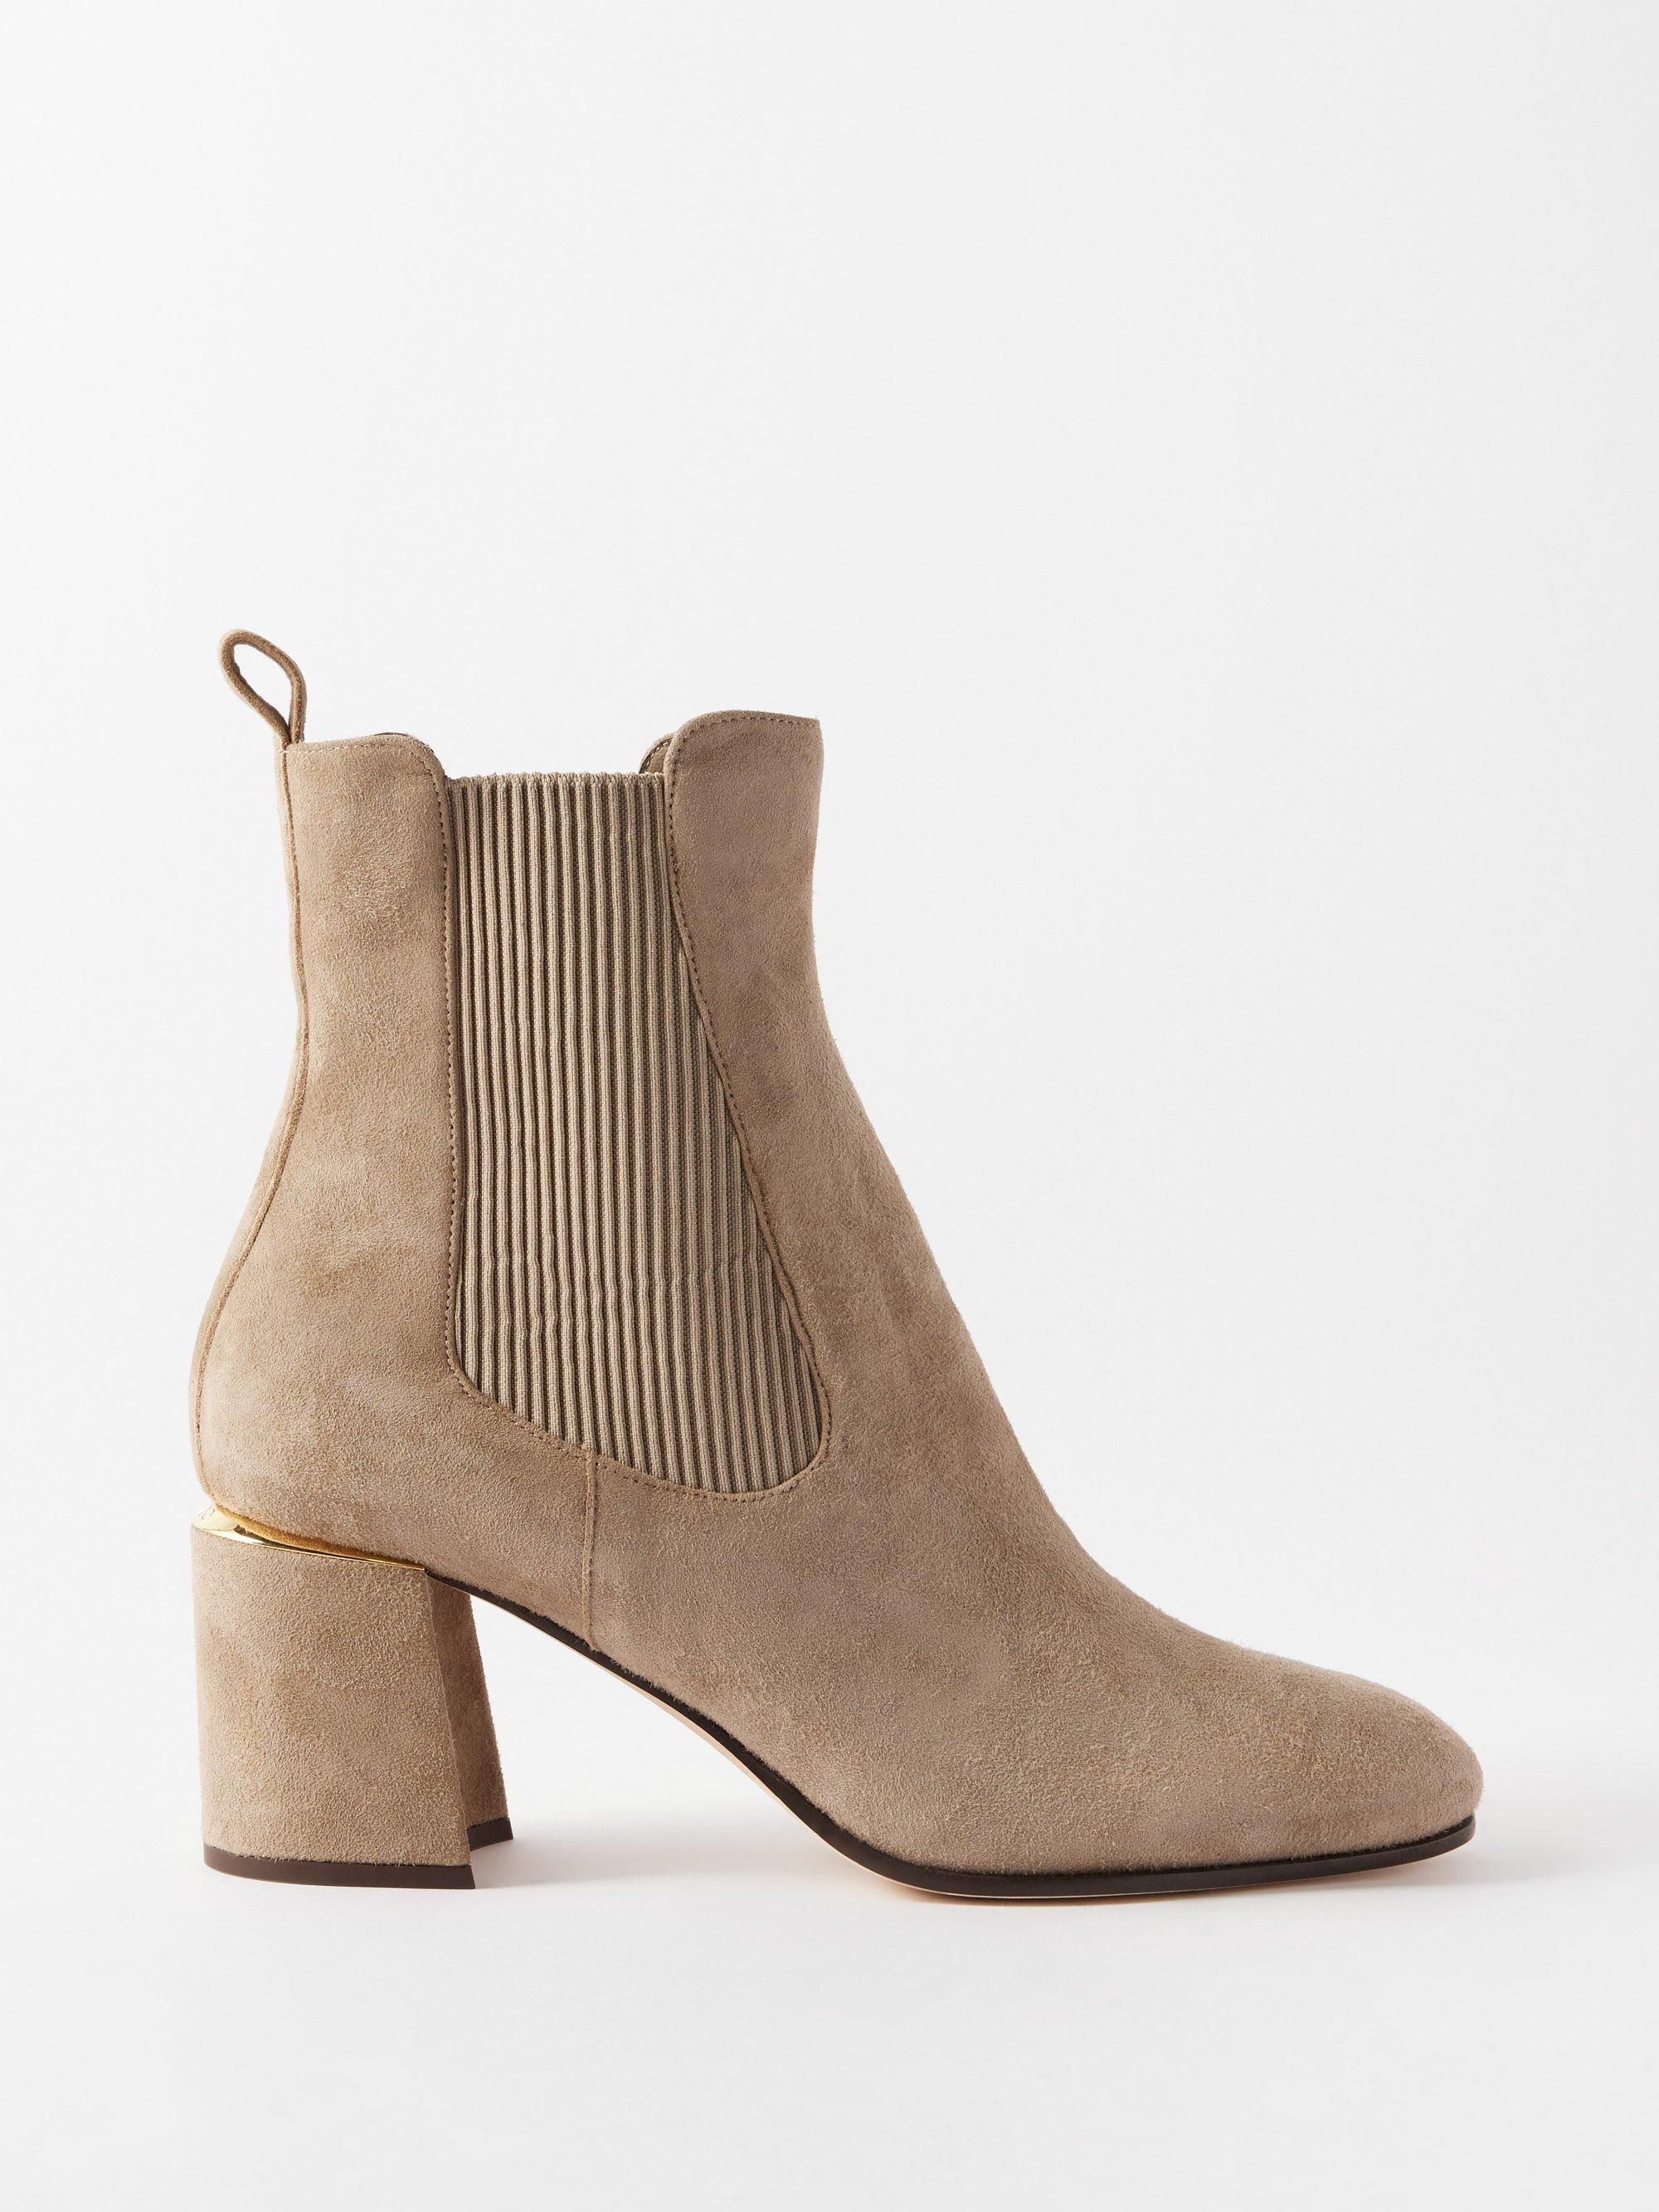 Jimmy Choo Thessaly 65 Suede Ankle Boots in Natural | Lyst Canada